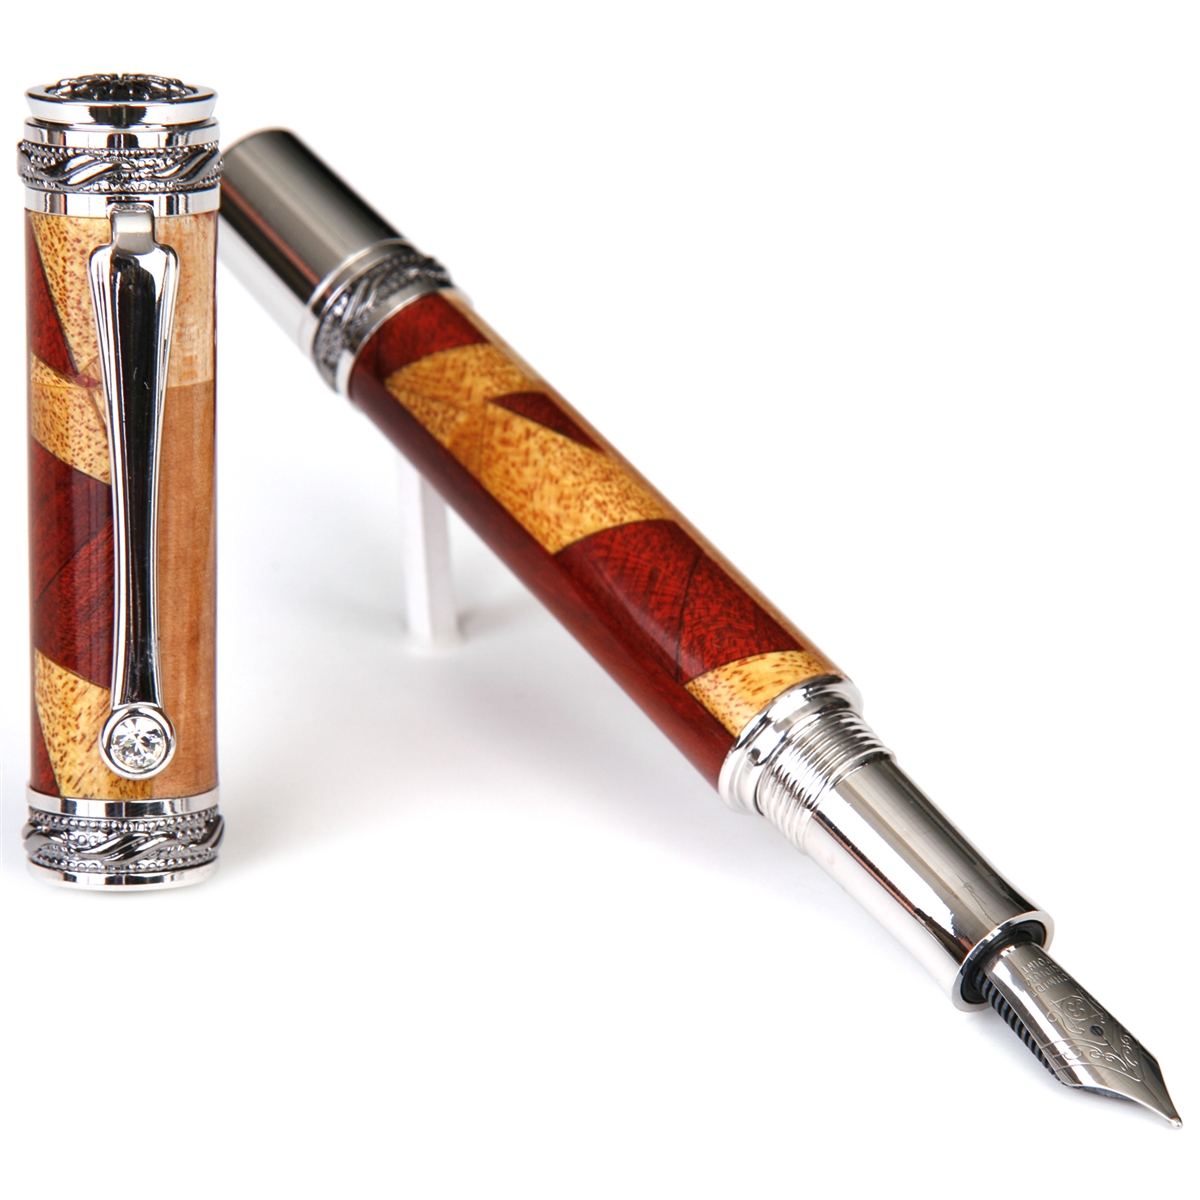 Majestic Fountain Pen - Maple with Bloodwood & Yellow Heart Inlays